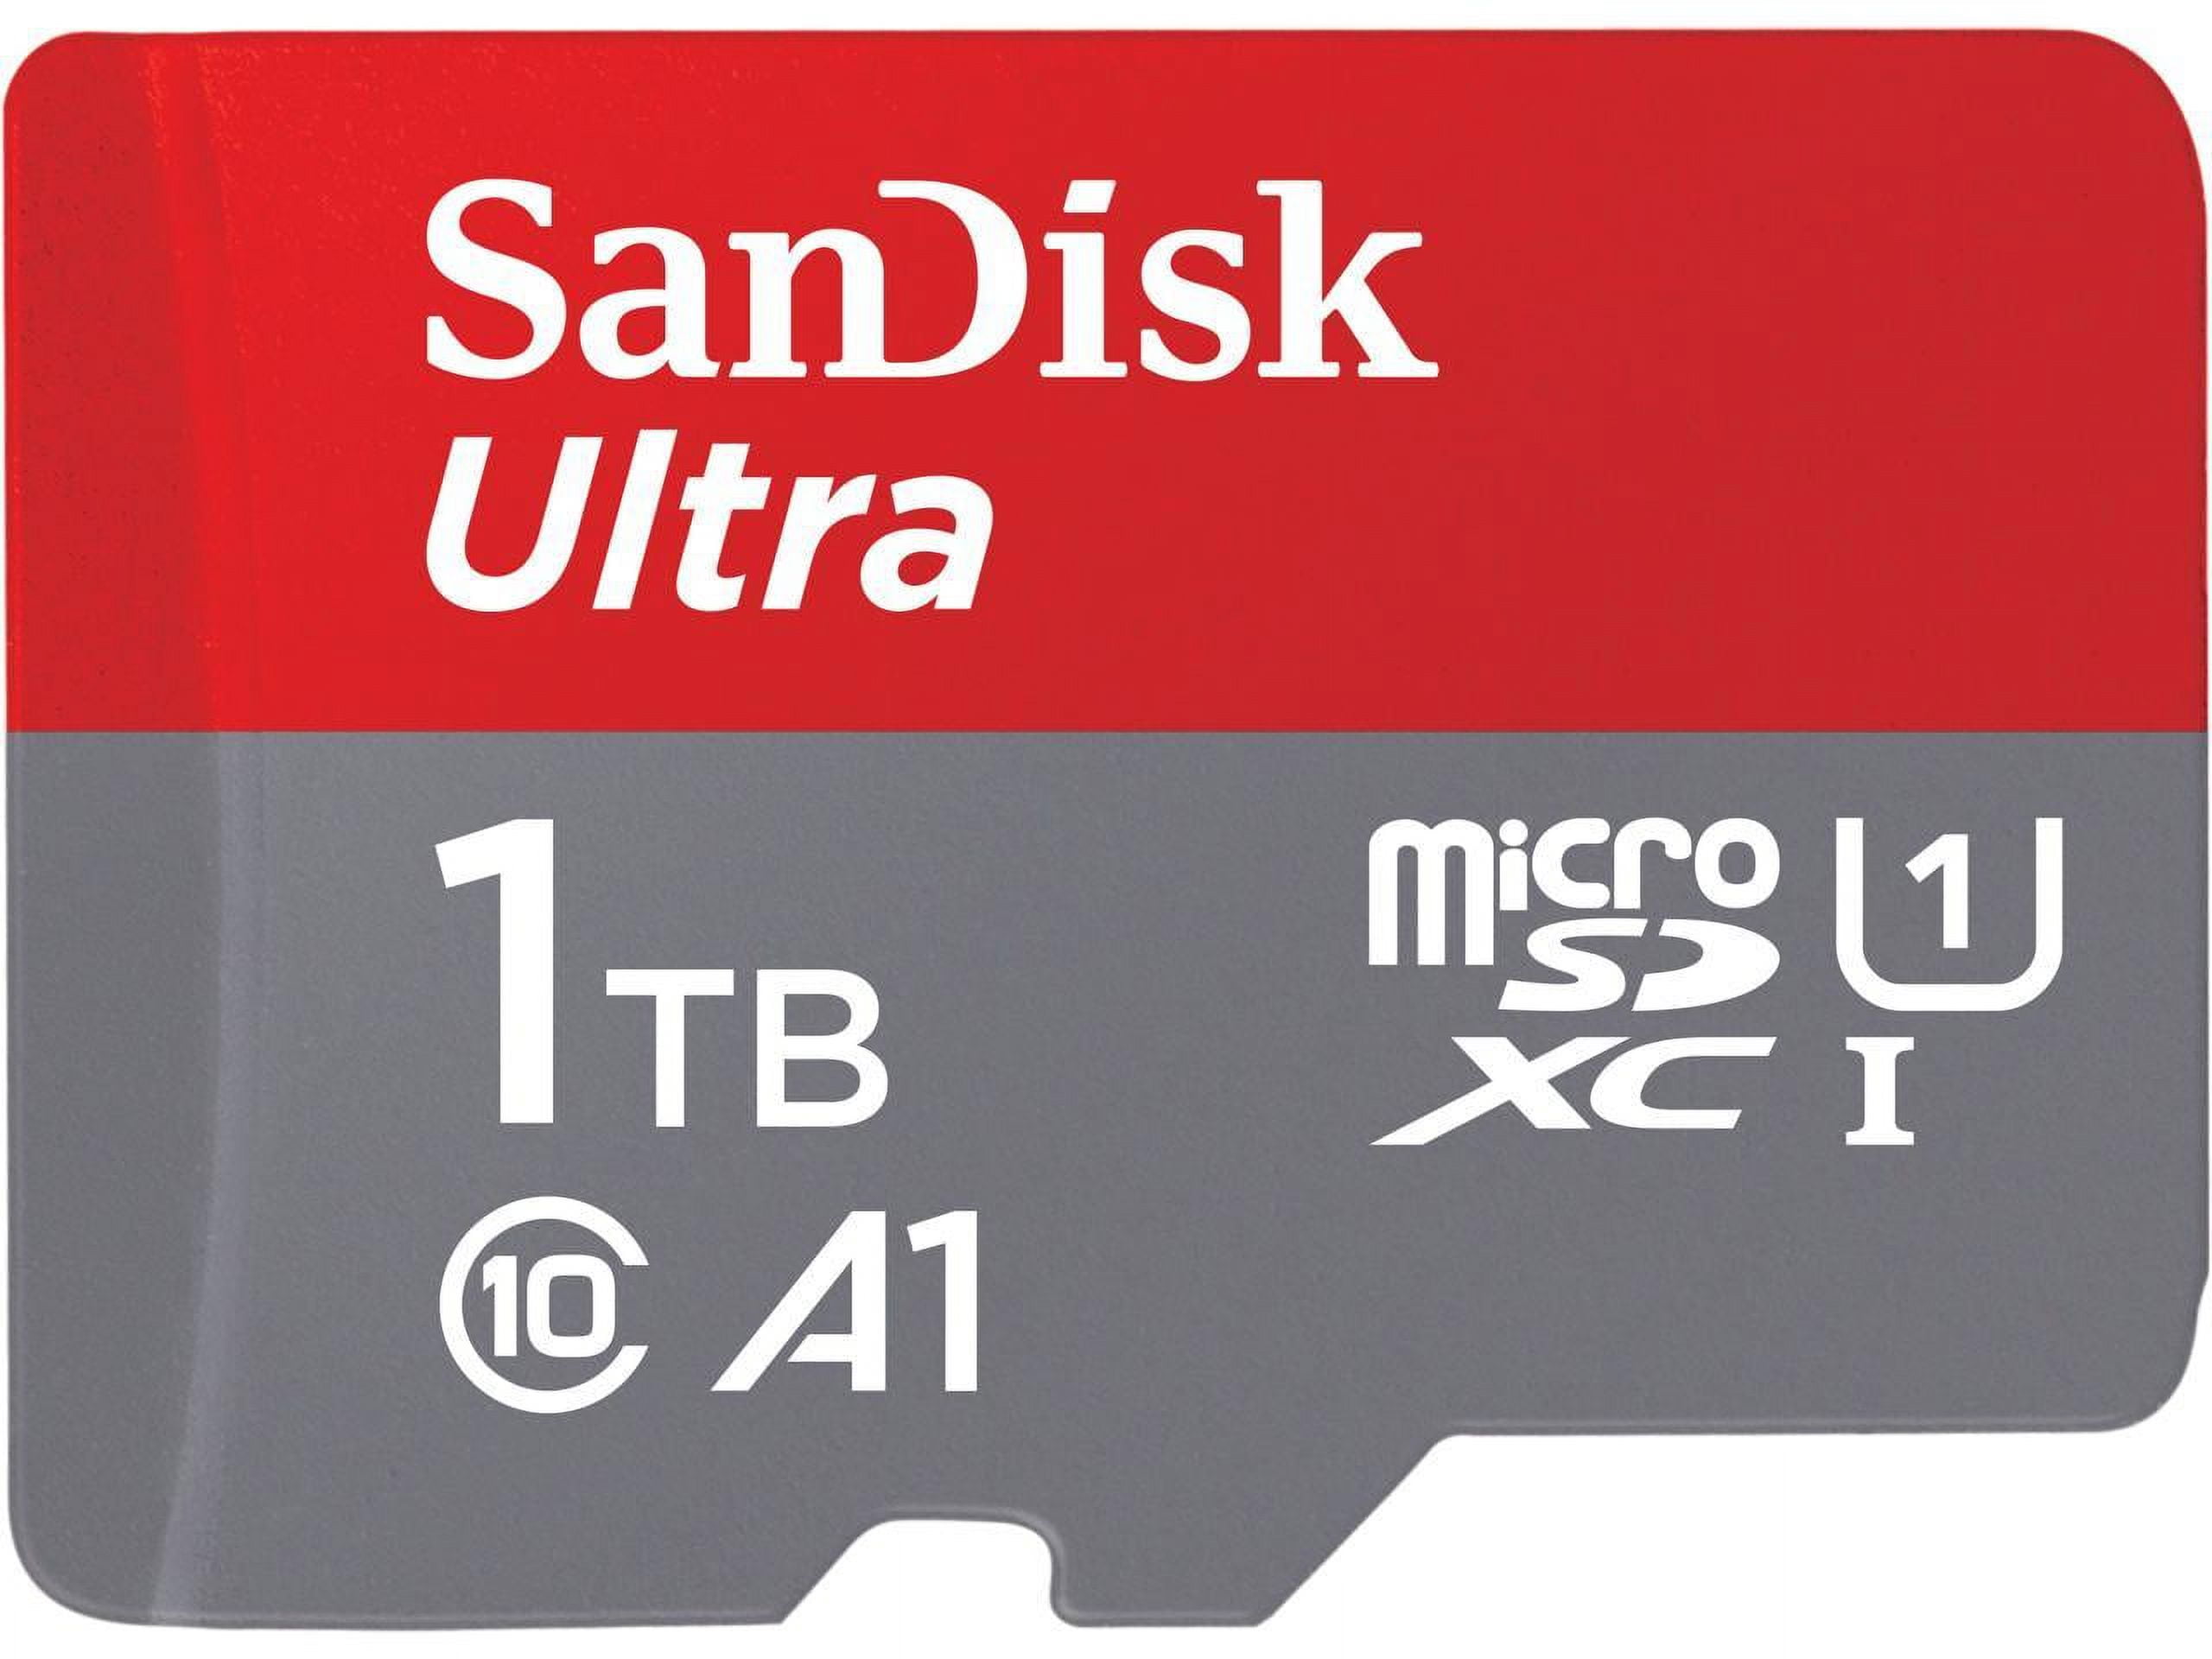 1TB SanDisk Extreme Micro SD Memory Card Bundle with Card Reader - Class 10  U3 SDXC UHS-I 1 Terabyte for Phones, Nintendo Switch, Camera